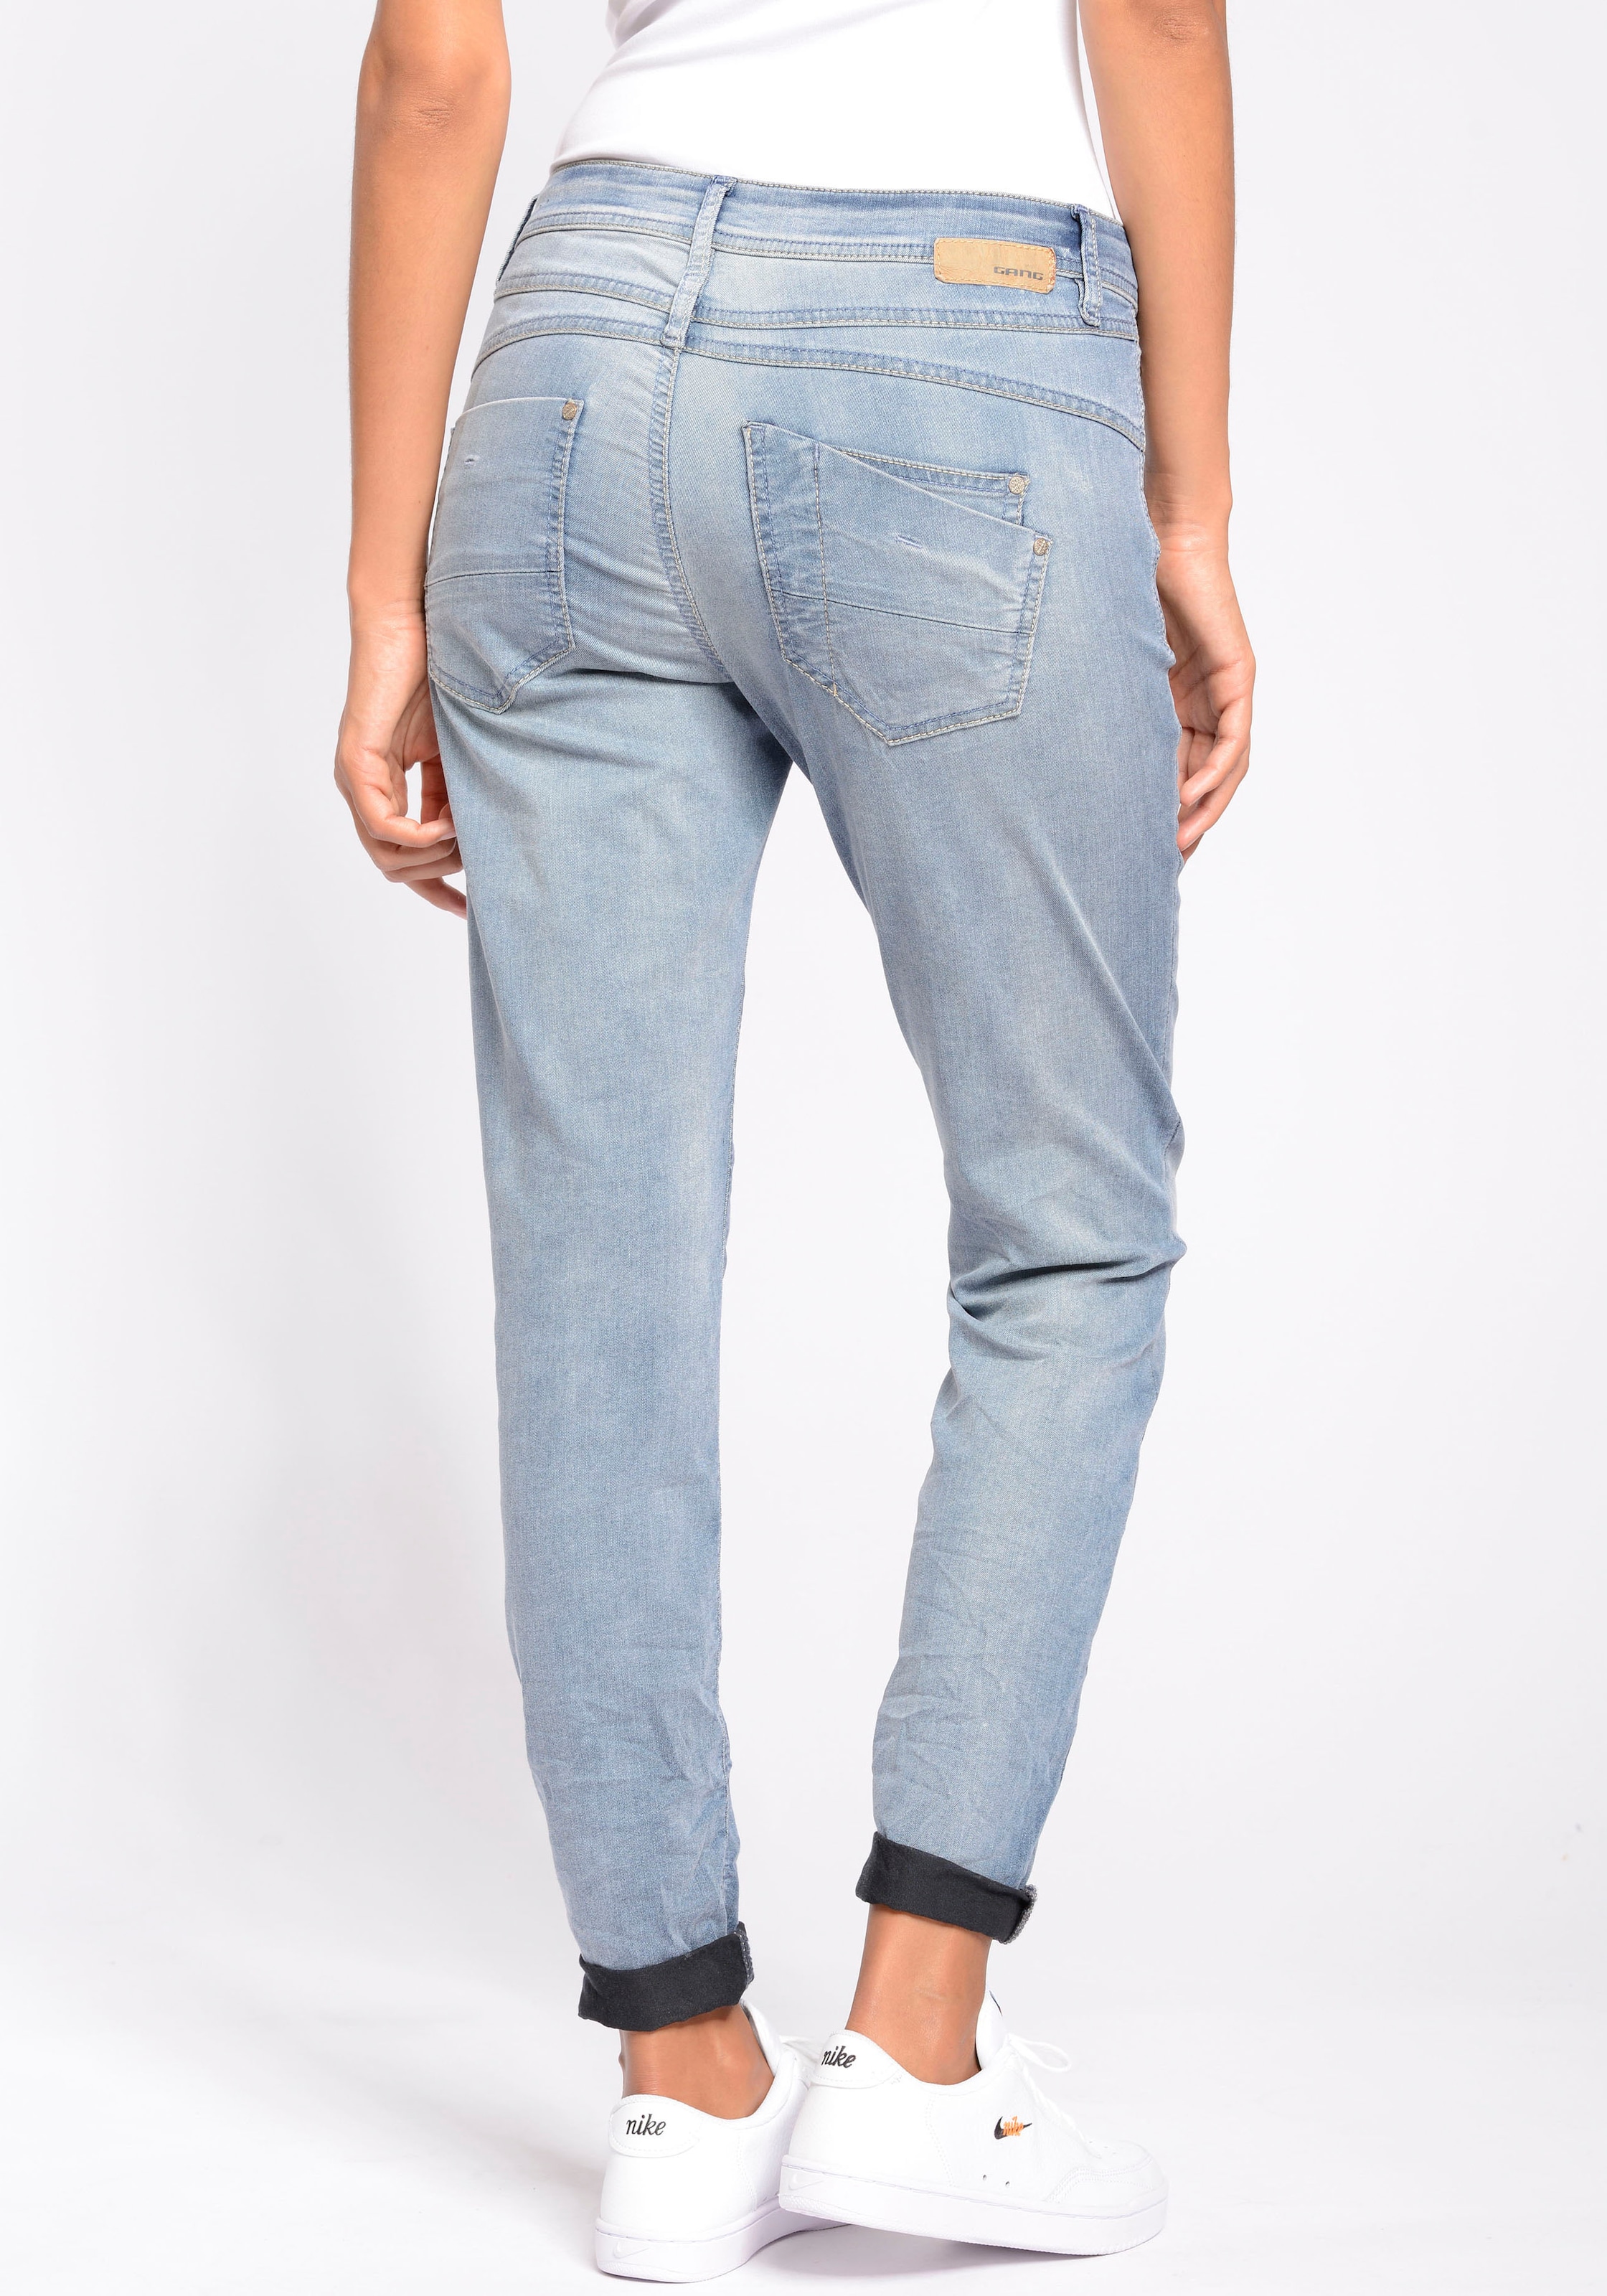 GANG Relax-fit-Jeans »Amelie«, cooler Used kaufen in Waschung bequem